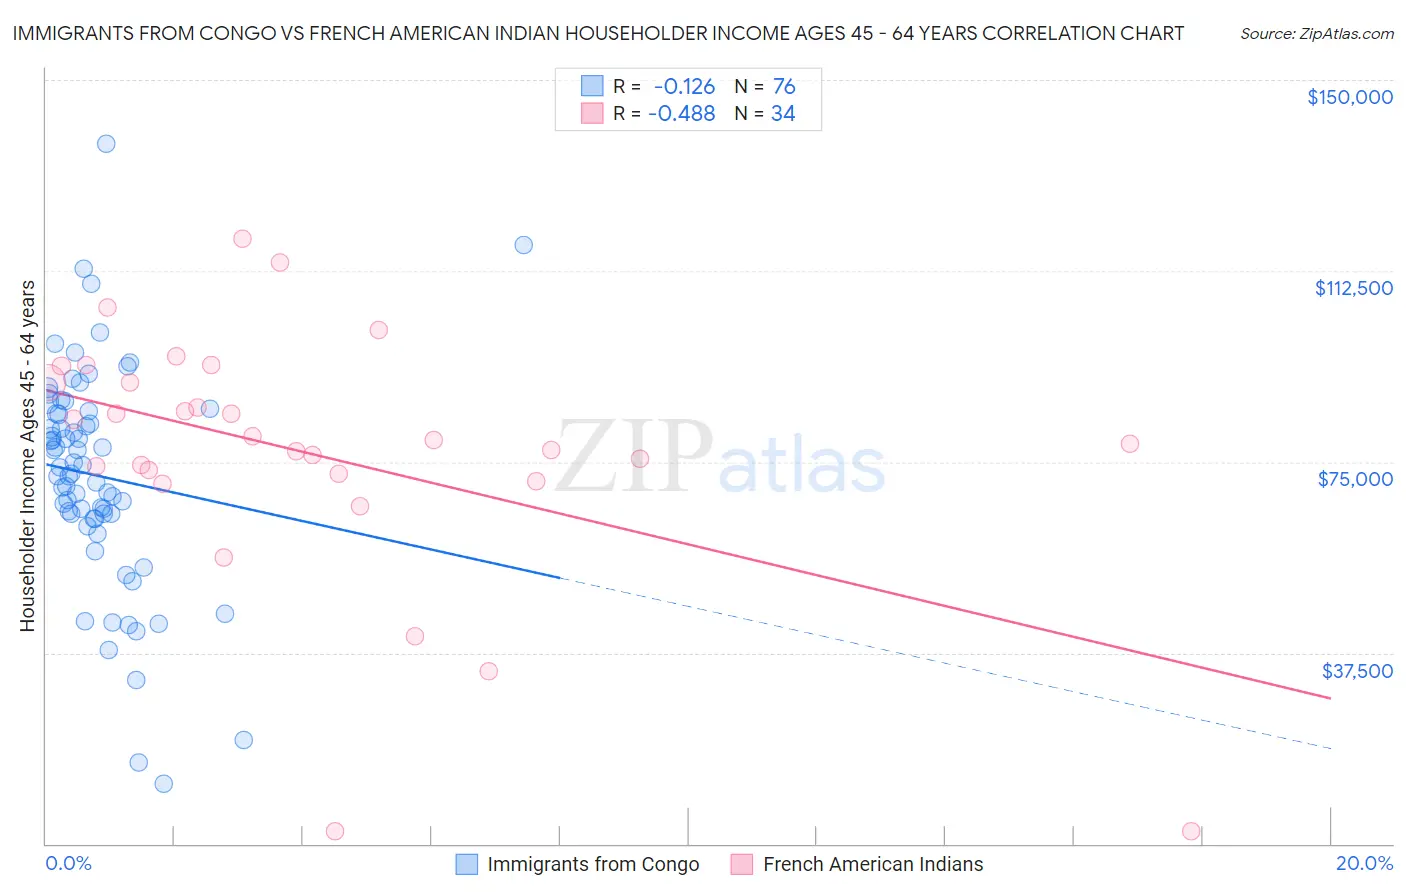 Immigrants from Congo vs French American Indian Householder Income Ages 45 - 64 years